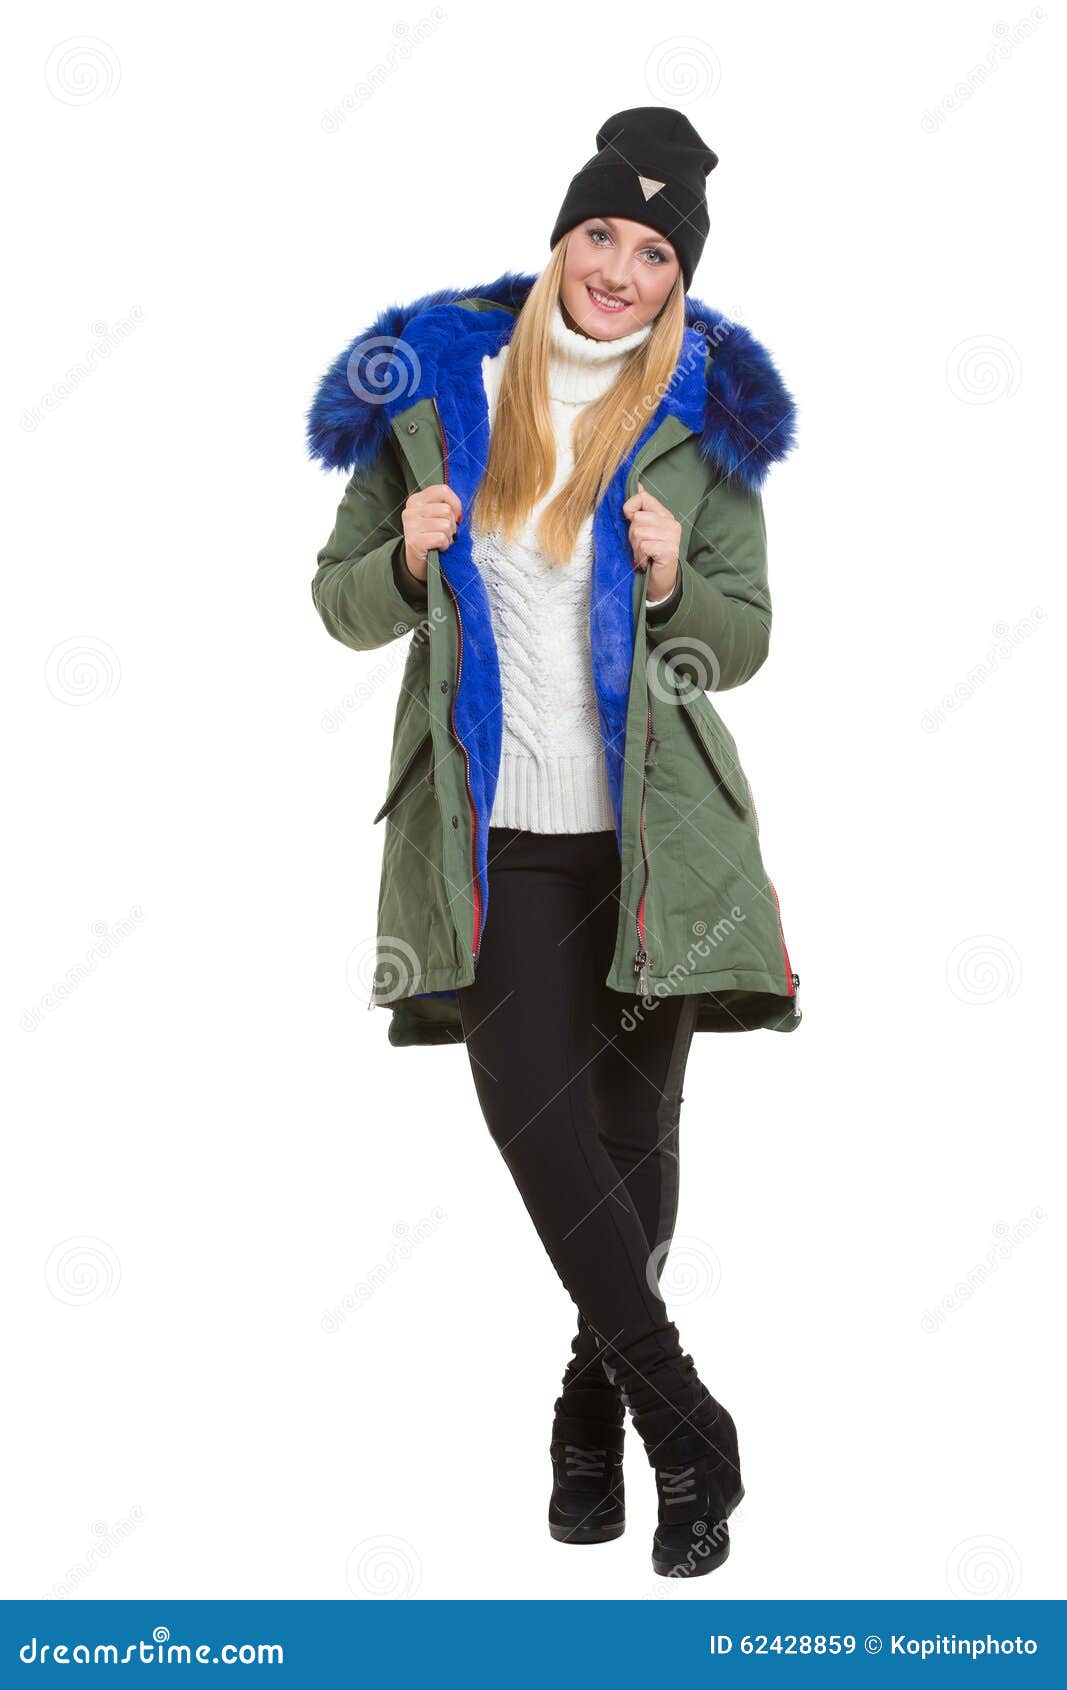 Woman Wearing Winter Jacket Scarf and Cap Stock Image - Image of lady ...